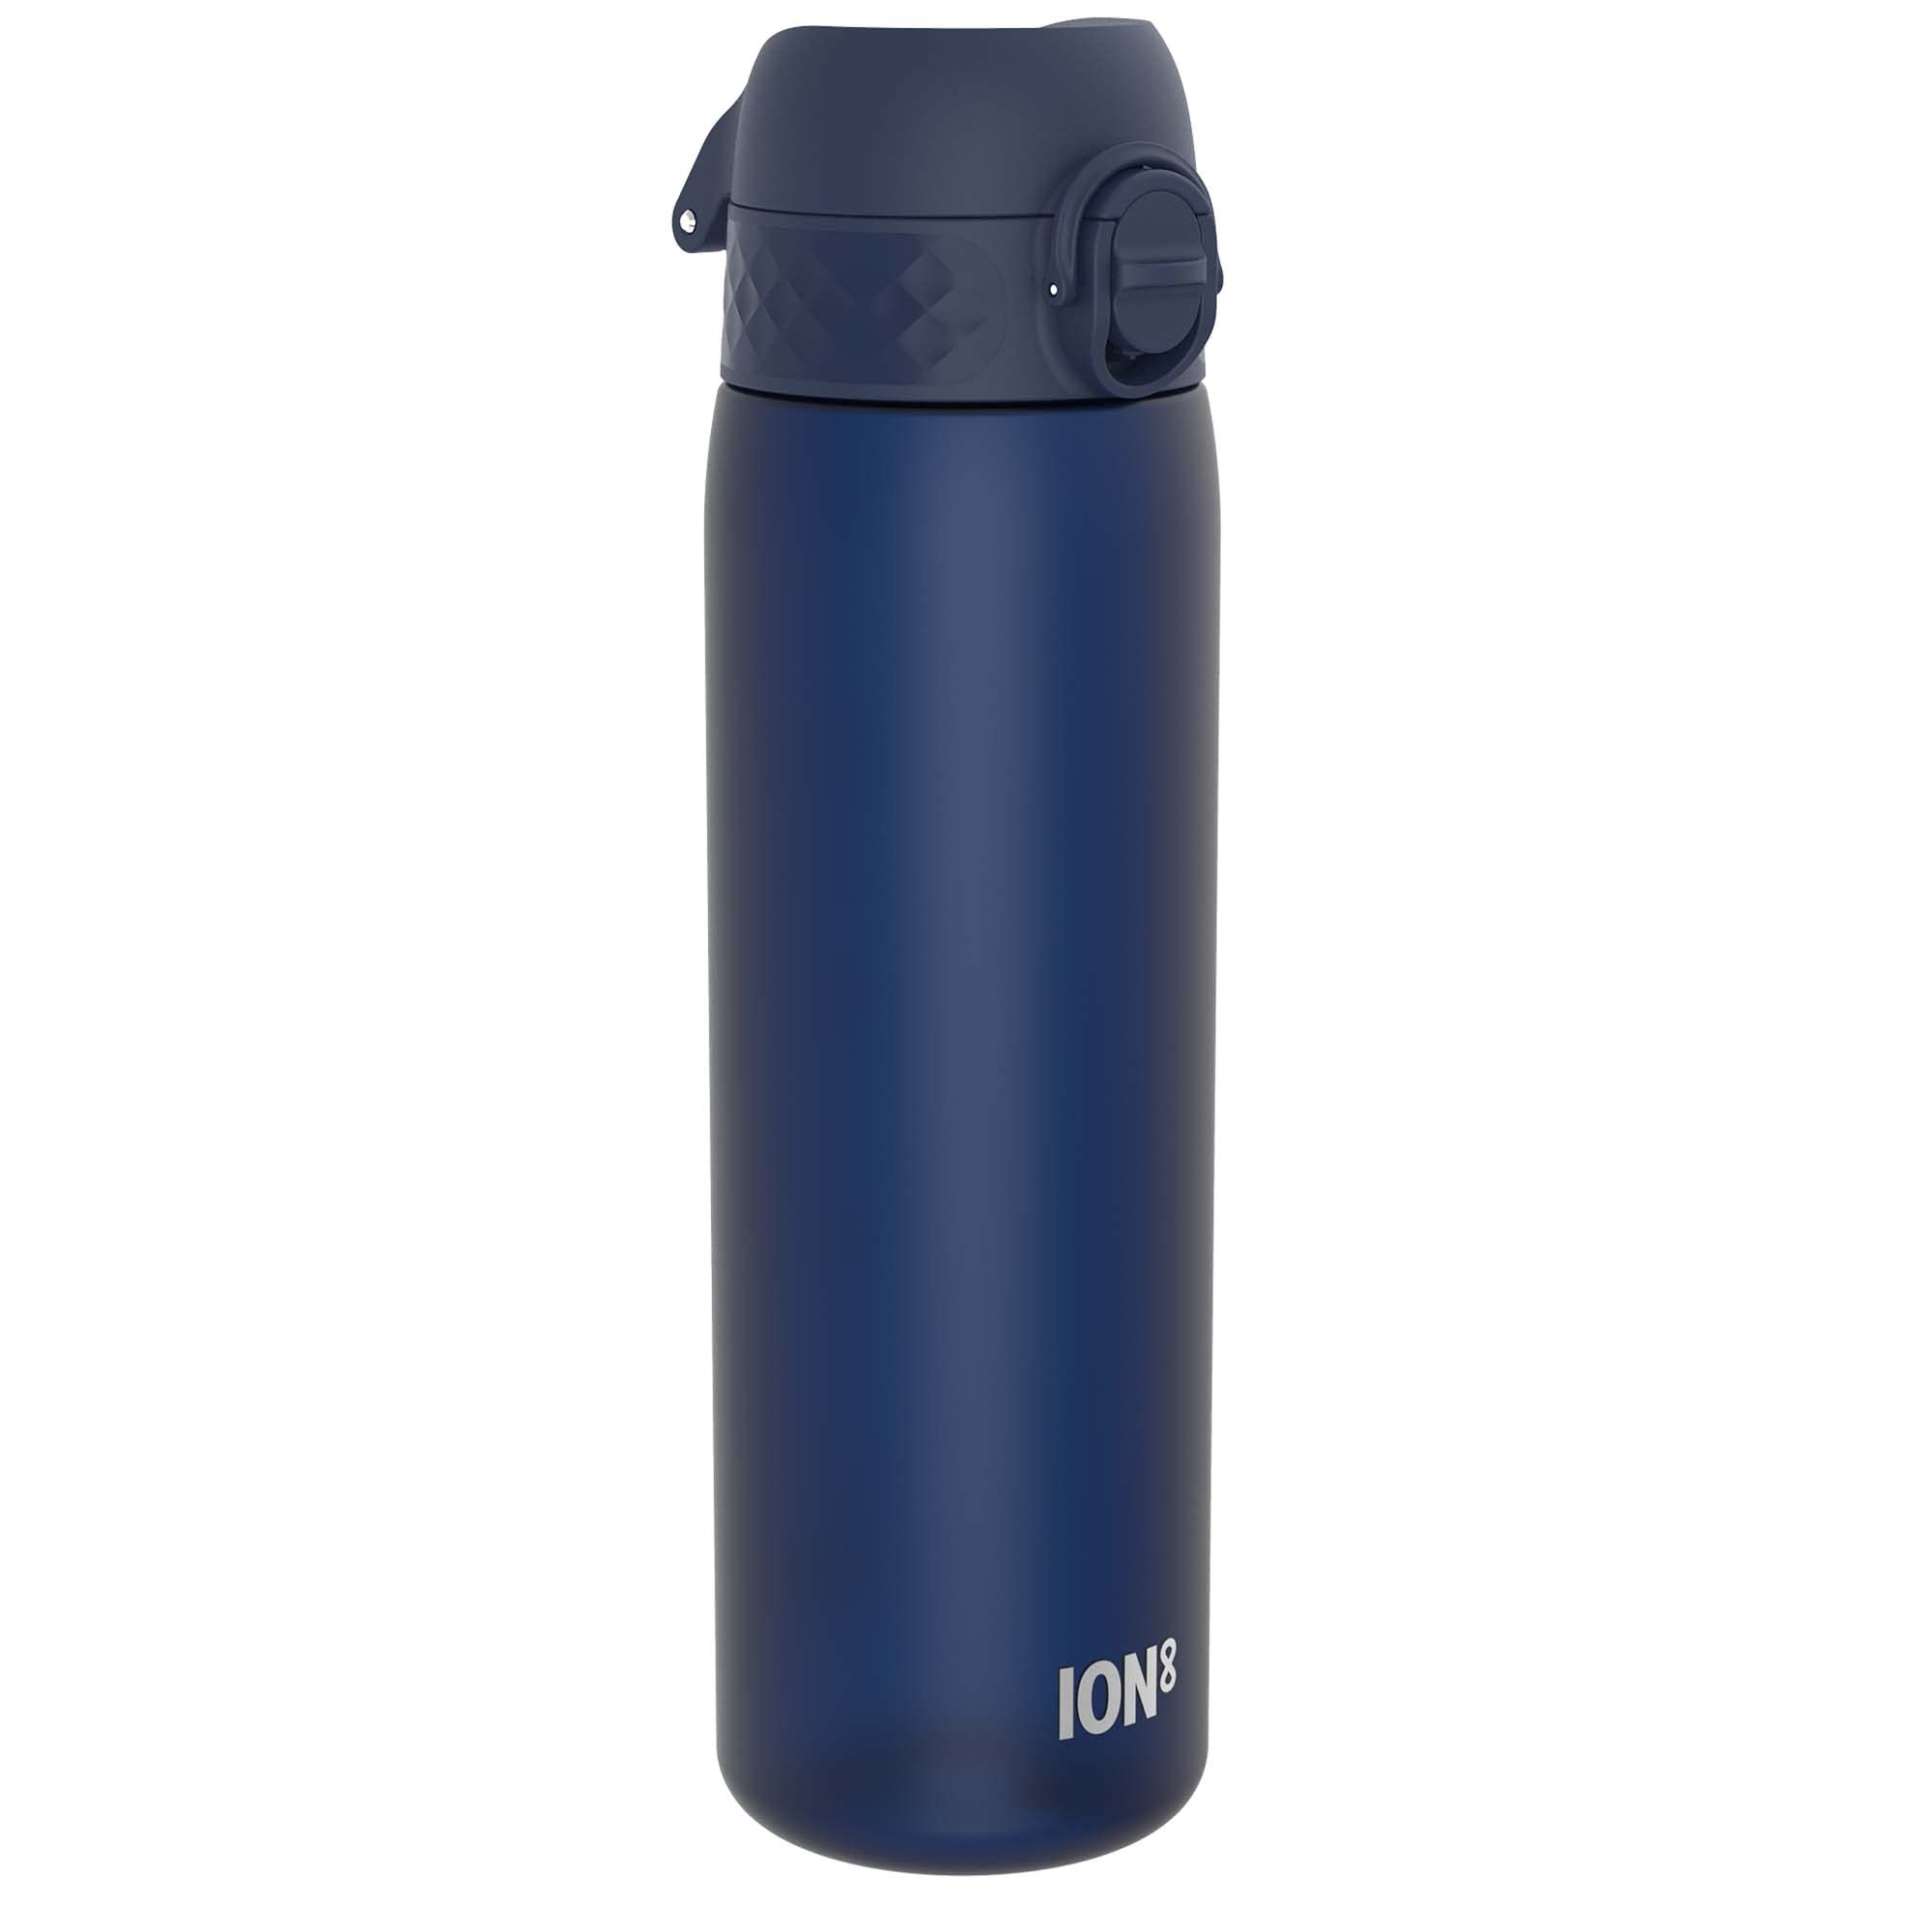 ION8 Water Bottle, 500 ml/18 oz, Leak Proof, Easy to Open, Secure Lock, Dishwasher Safe, BPA Free, Hygienic Flip Cover, Carry Handle, Fits Cup Holders, Easy Clean, Odor Free, Carbon Neutral, Navy Blue